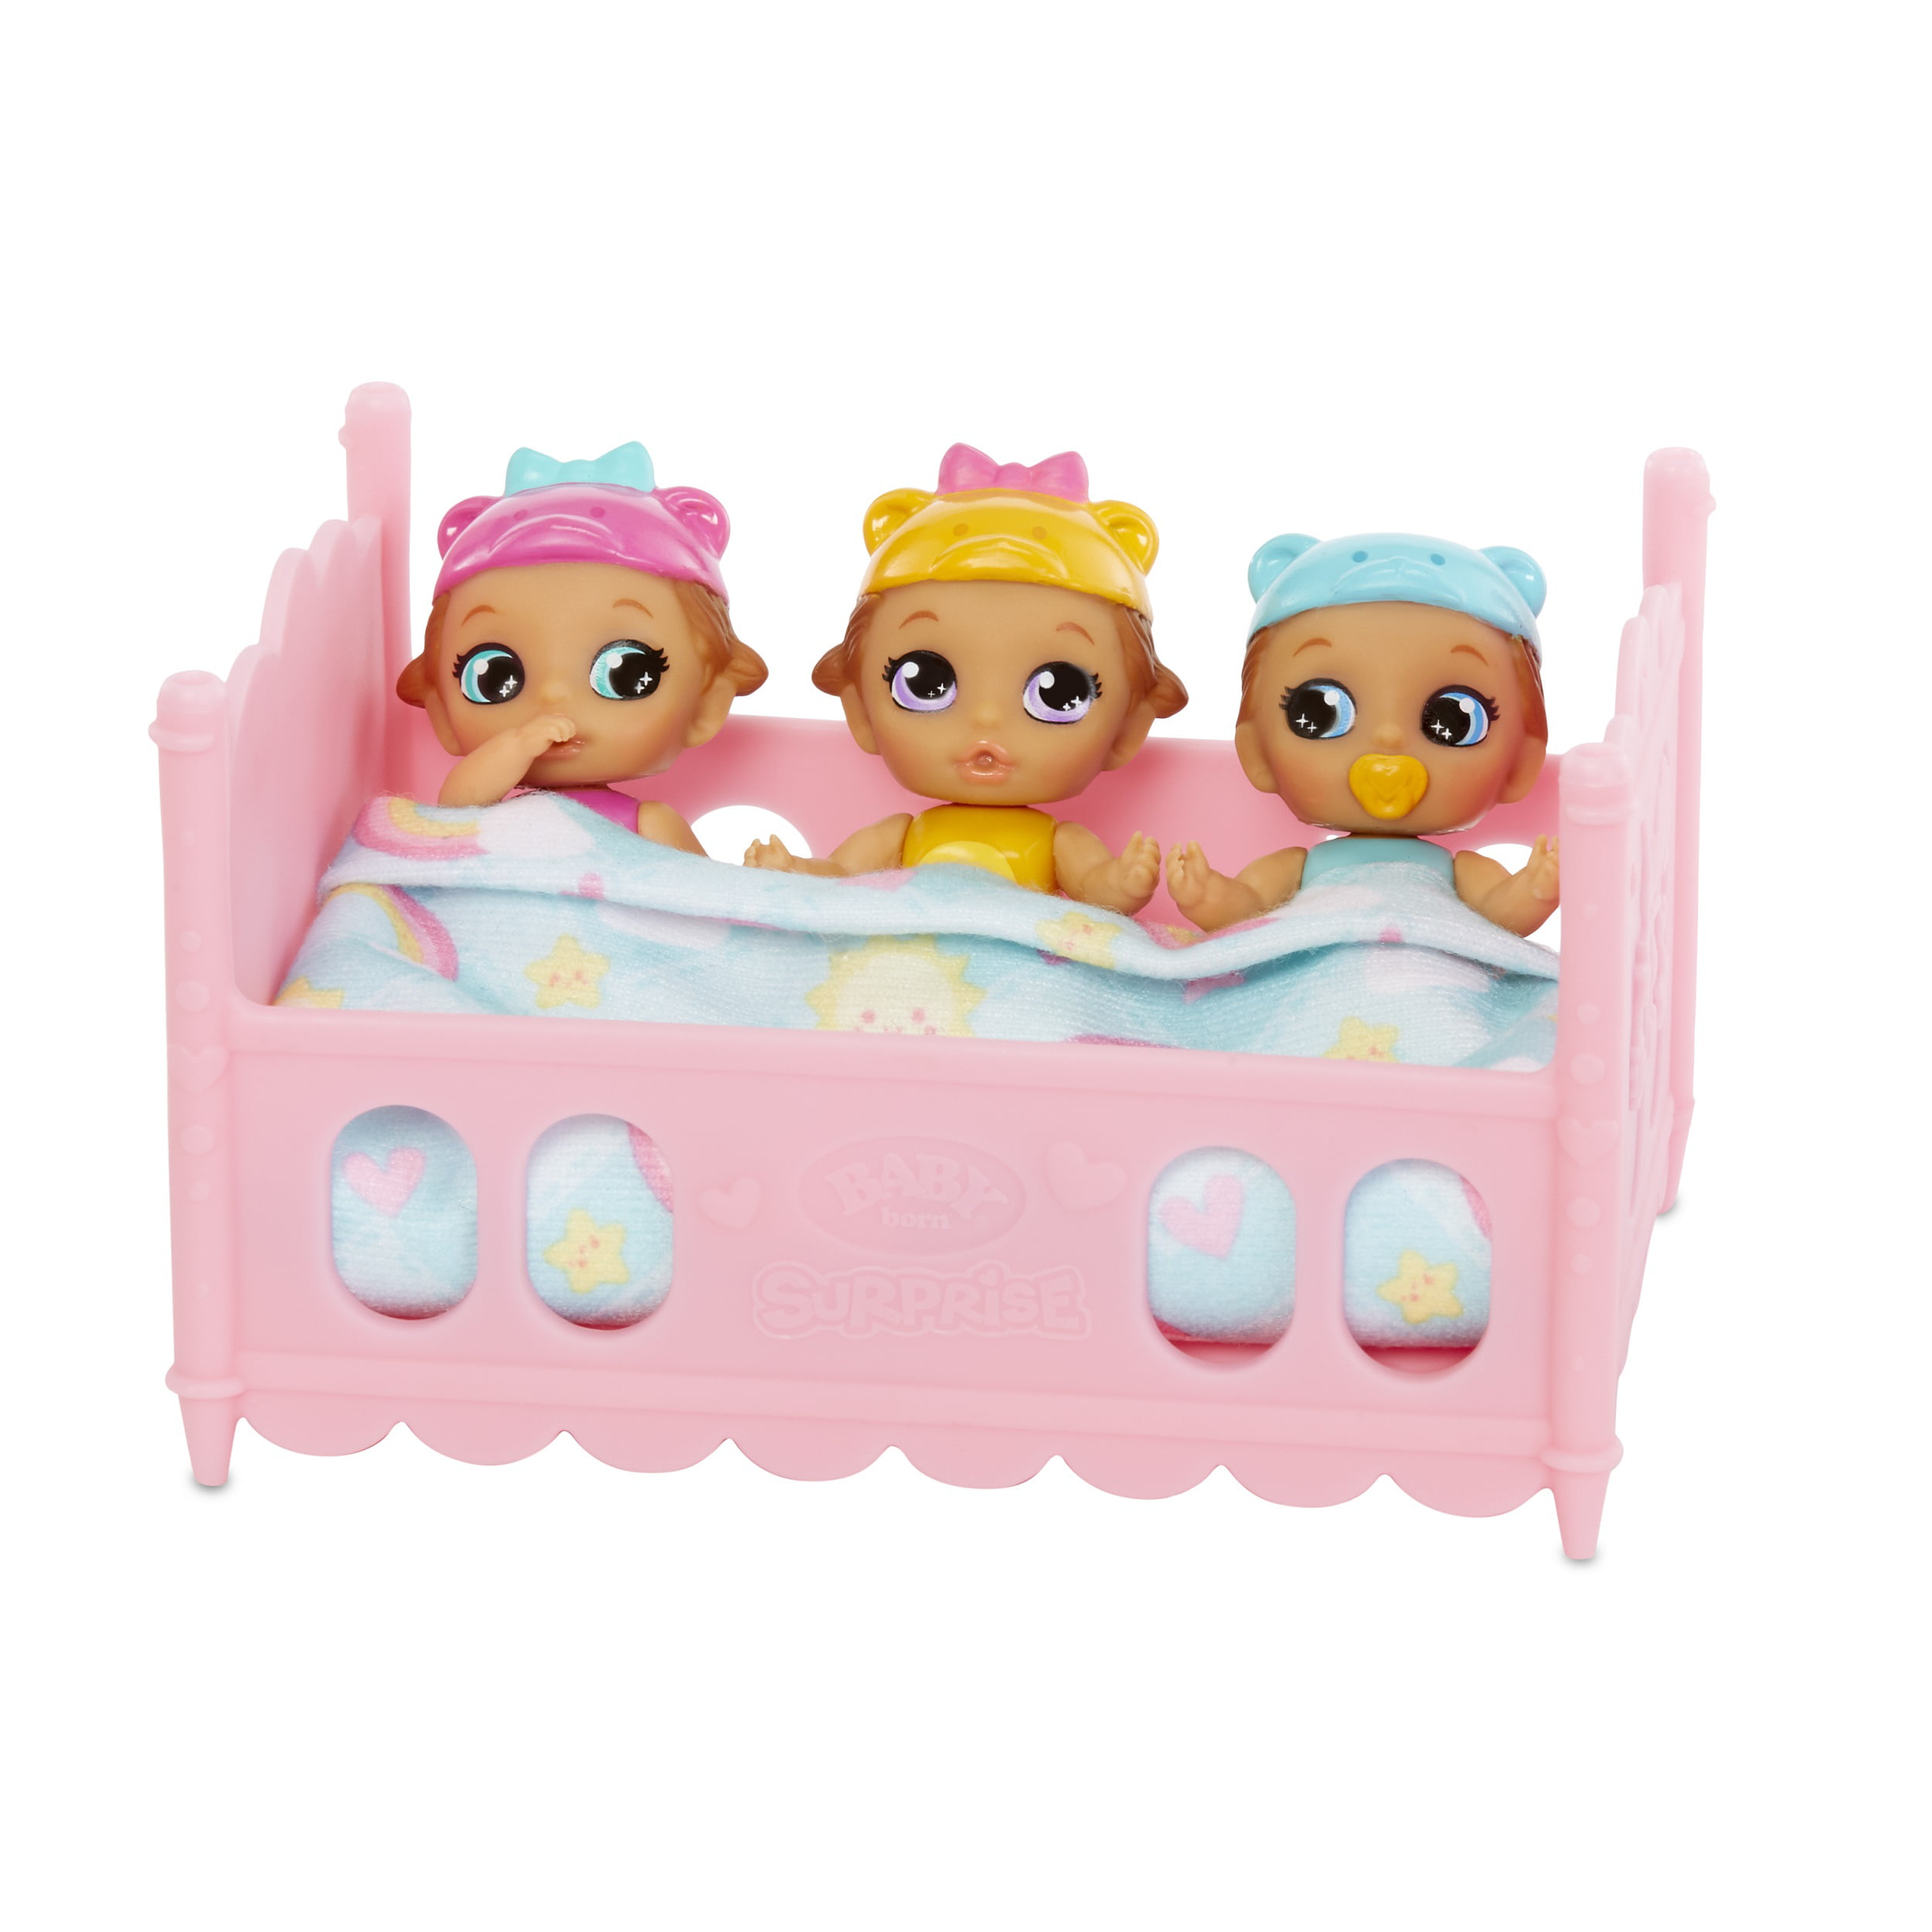 in stand houden Handvest tellen Baby Born Surprise Mini Babies – Unwrap Surprise Twins or Triplets  Collectible Baby Dolls with Soft Swaddle, Blanket, Crib Playset -  Walmart.com